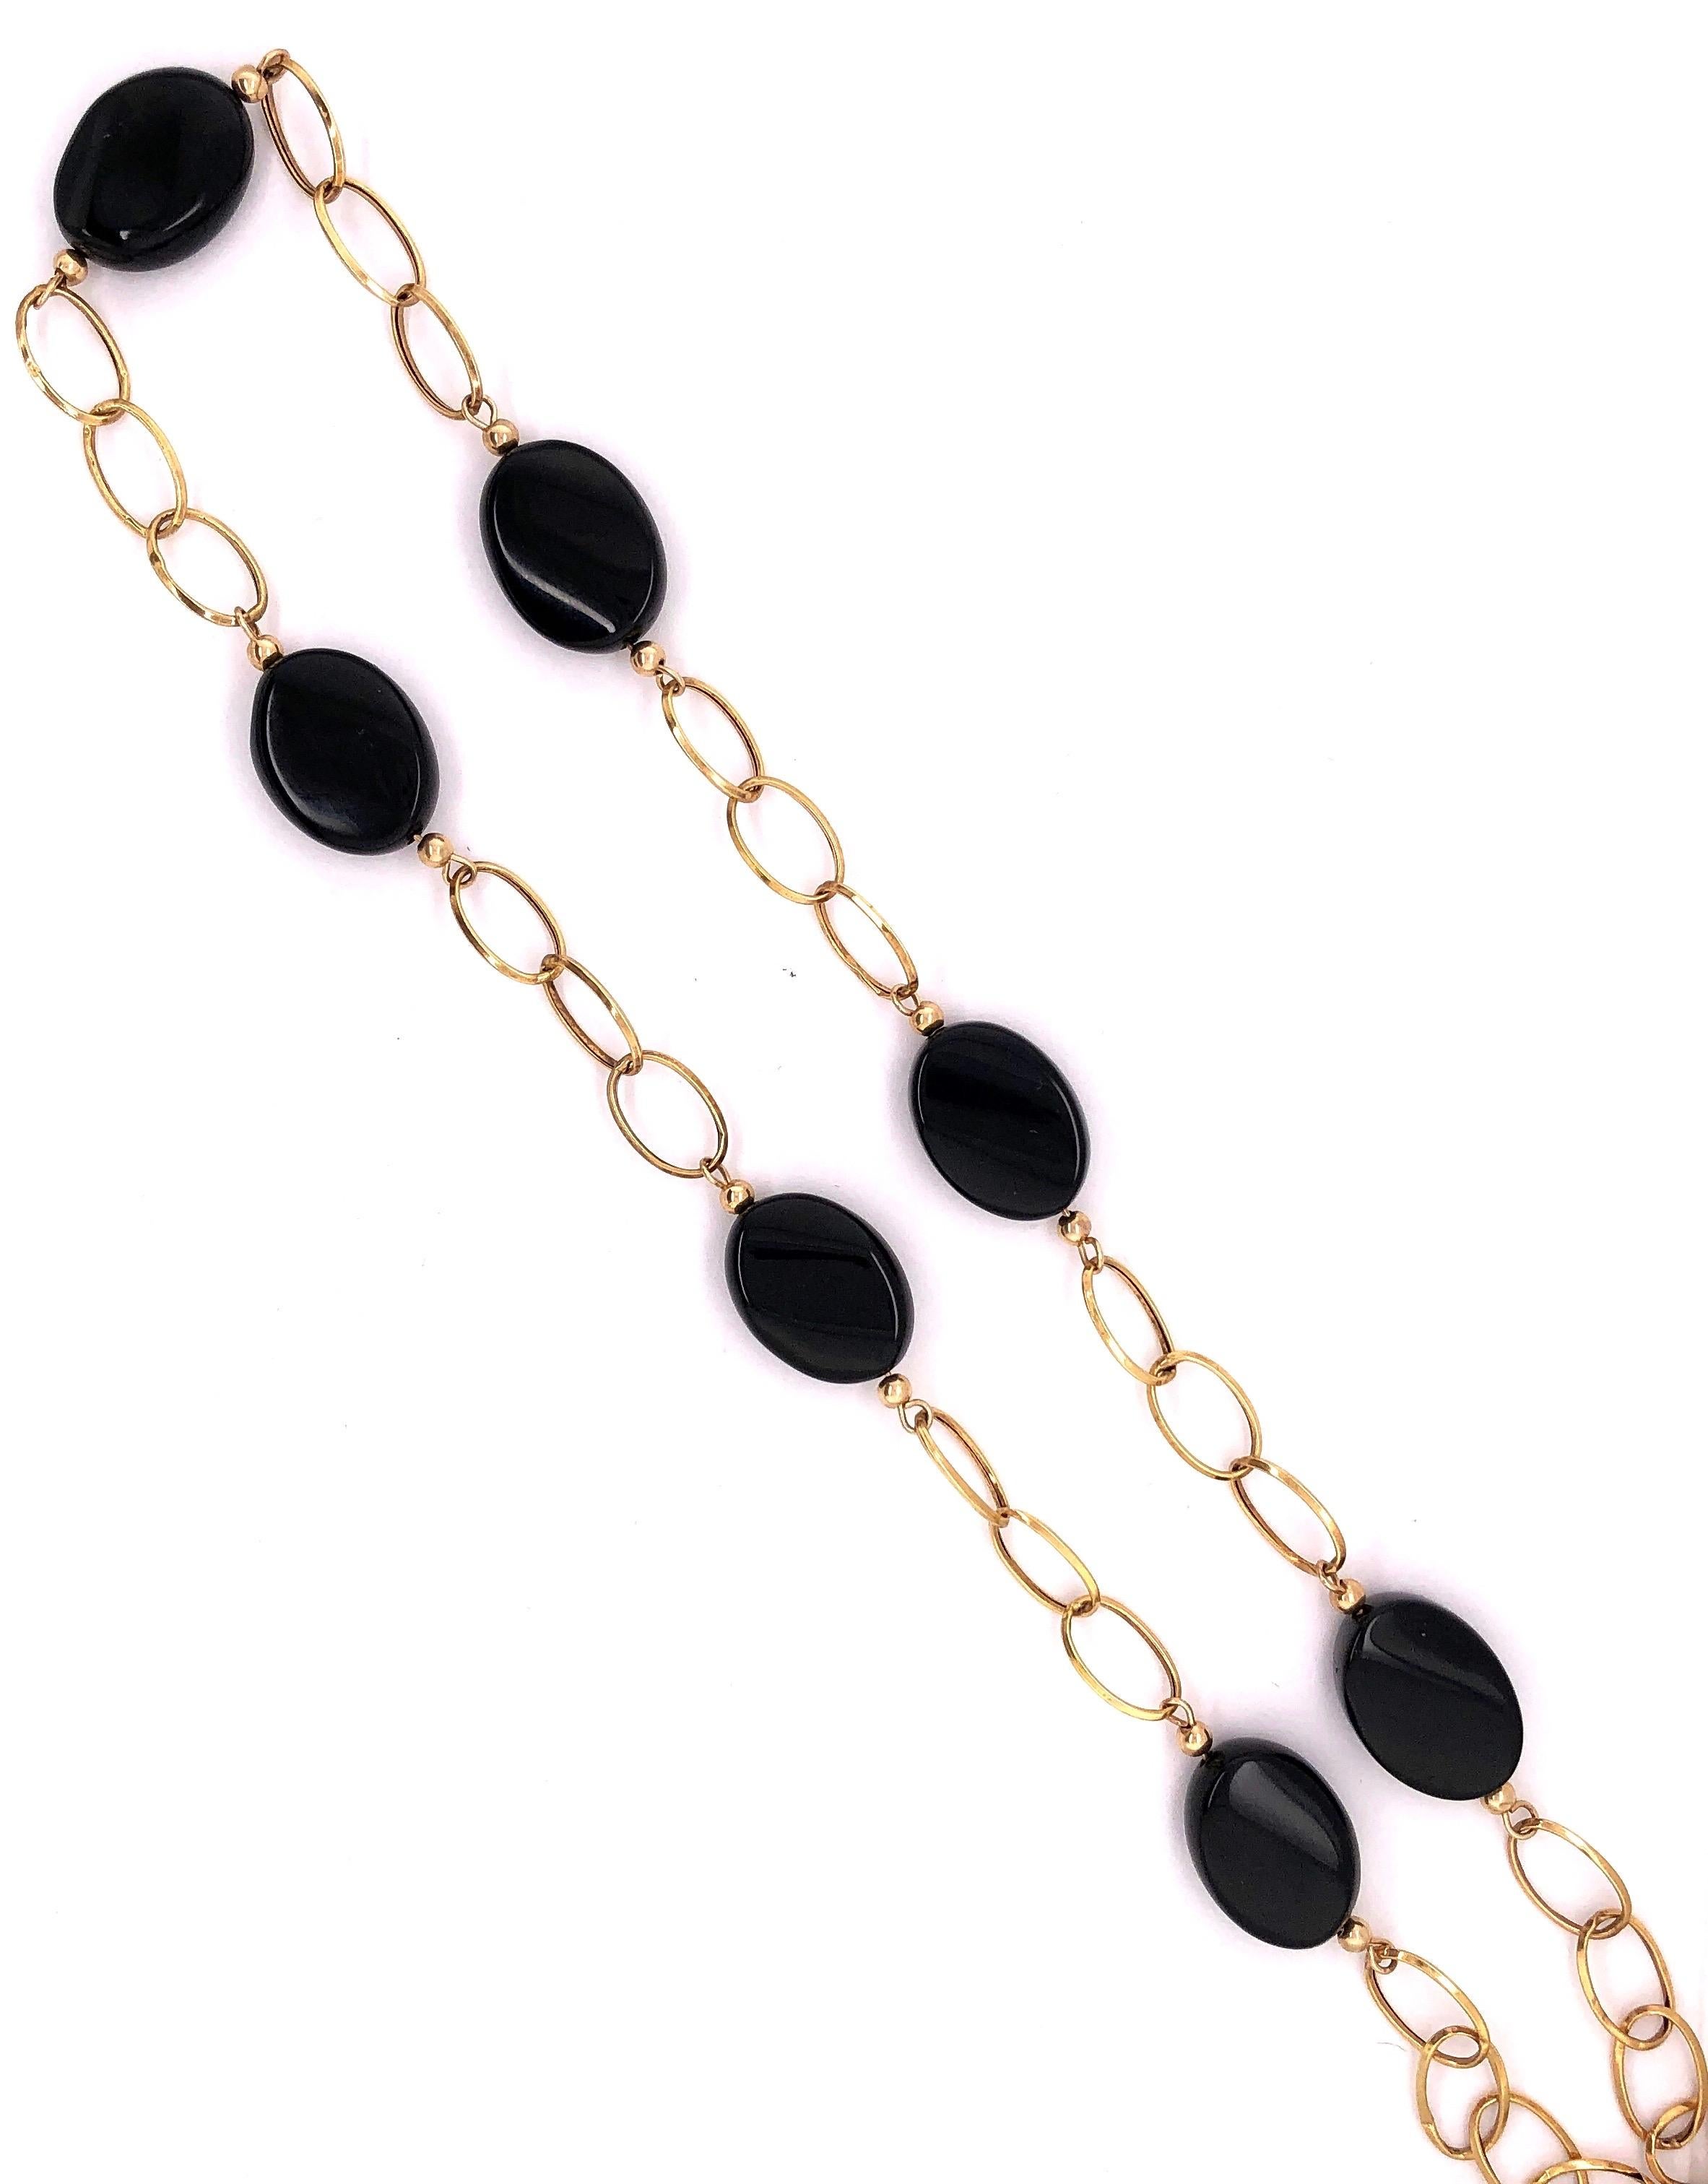 14 Karat Yellow Gold Link Necklace with Ebony Stones 21.2 Grams Total For Sale 9